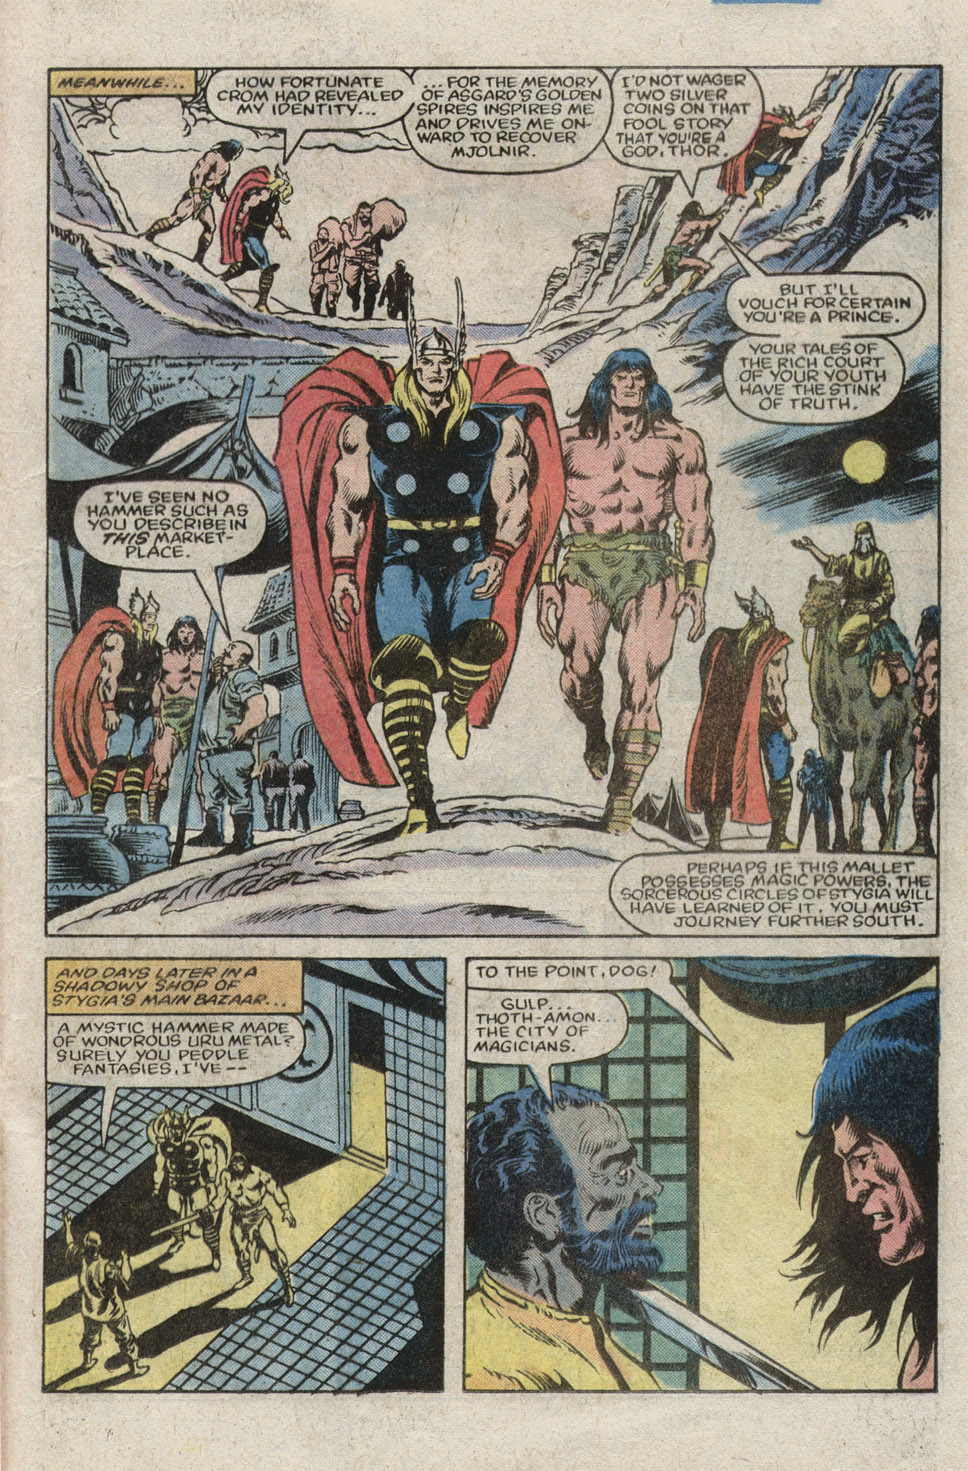 What If? (1977) issue 39 - Thor battled conan - Page 29